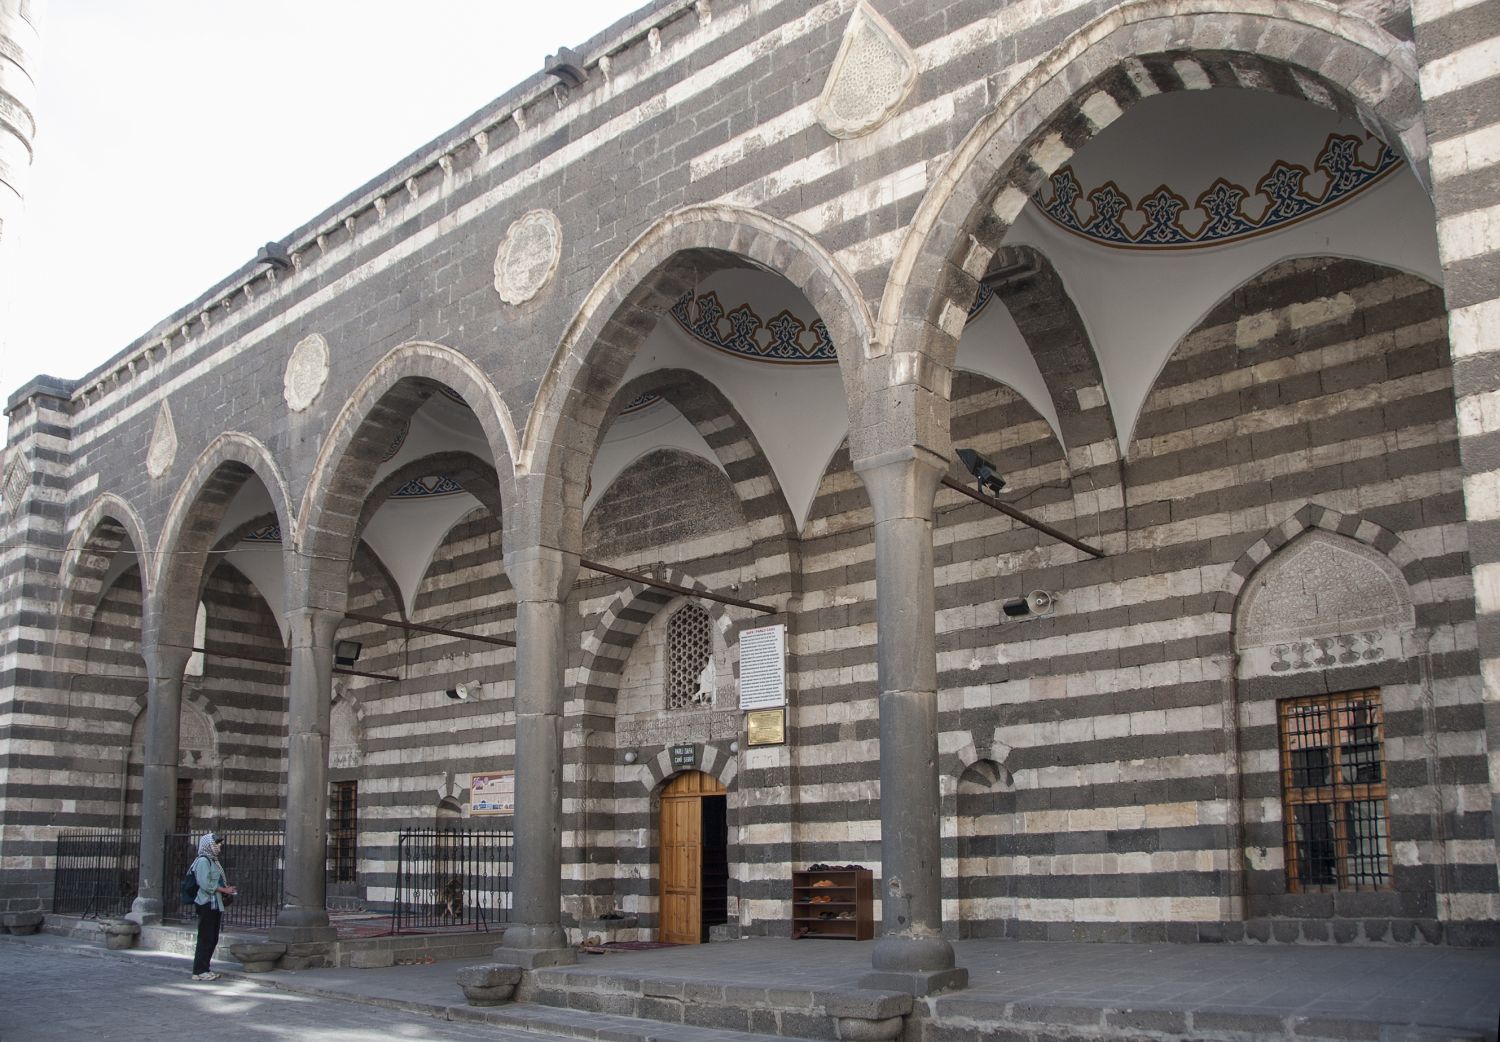 View of portico fronting the mosque on its north side.